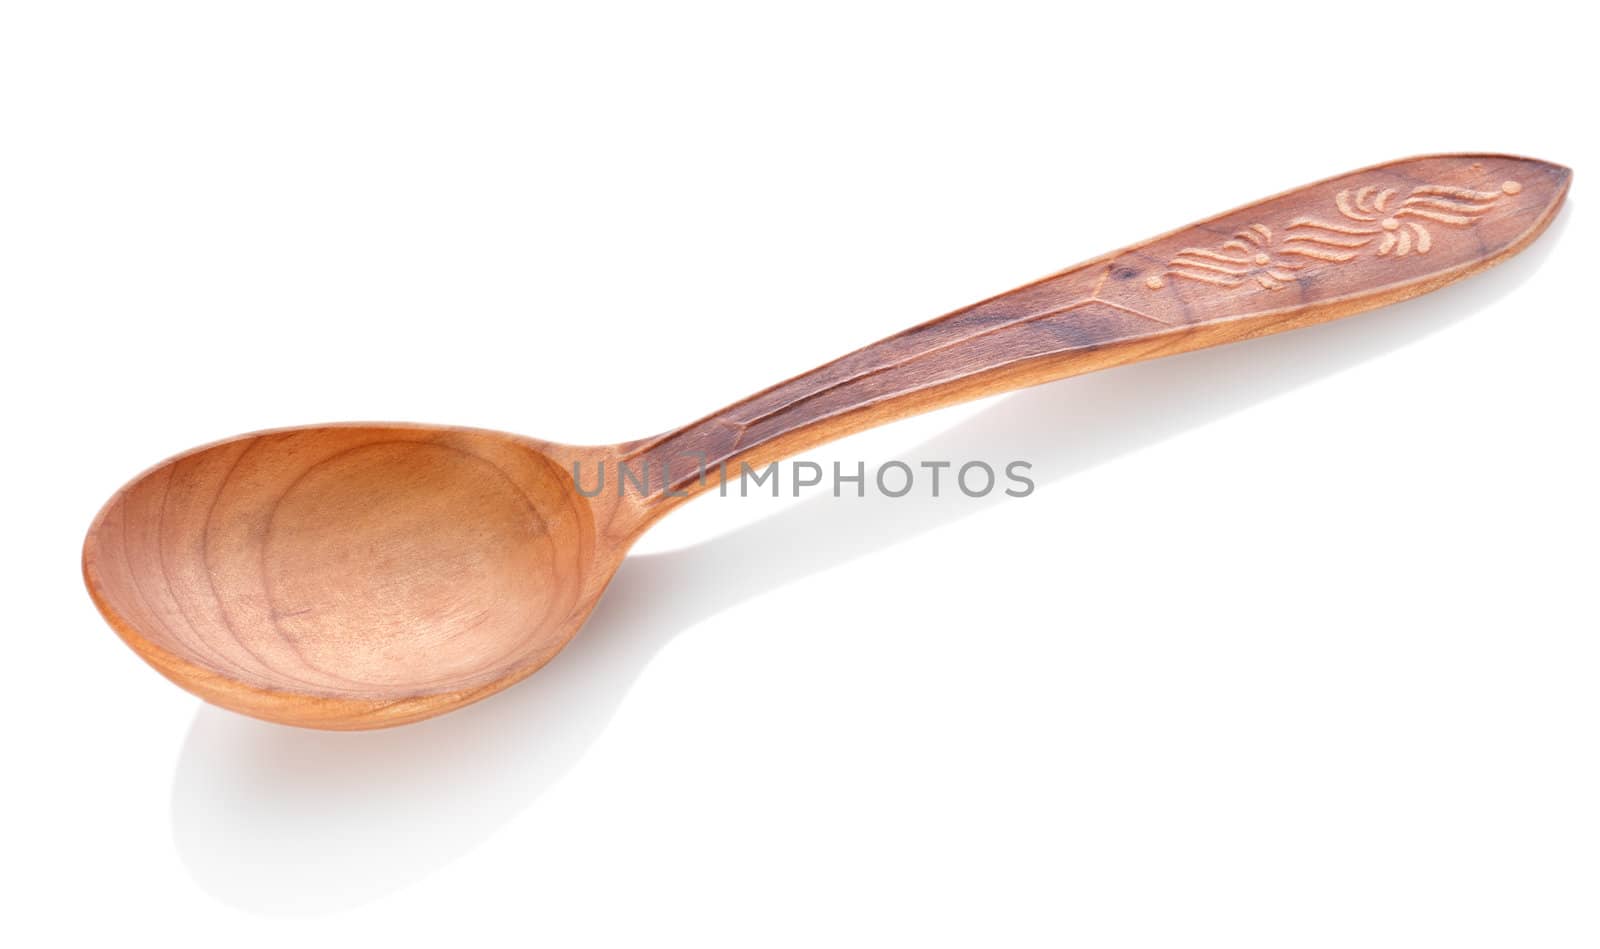 Wooden spoon by Givaga